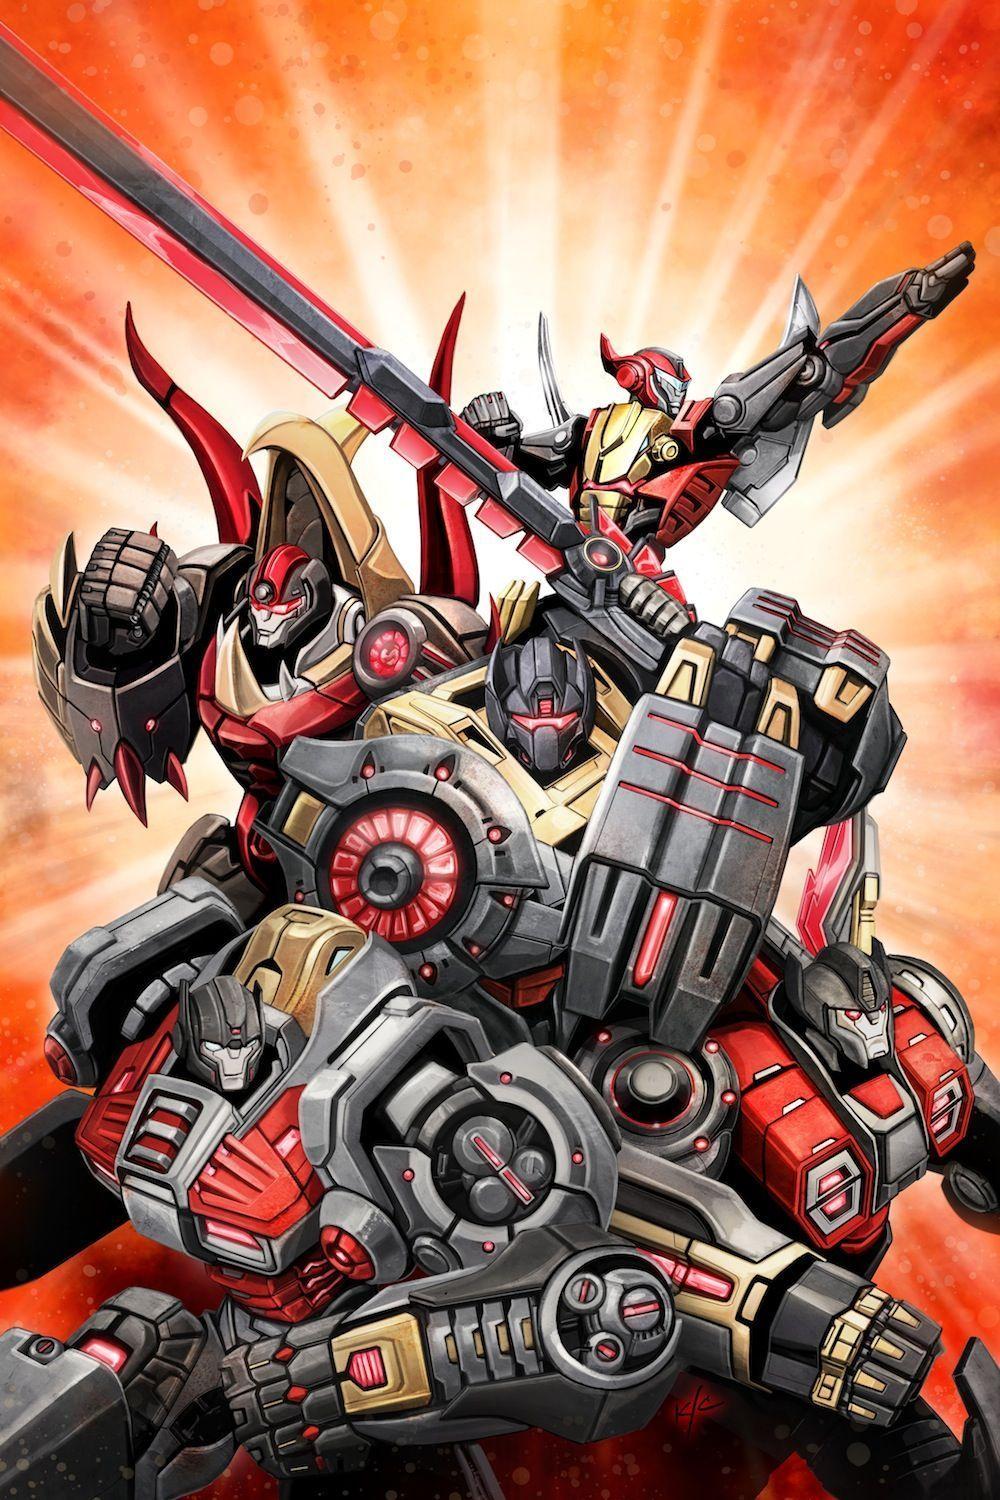 image For > Transformers Fall Of Cybertron Dinobots Wallpaper